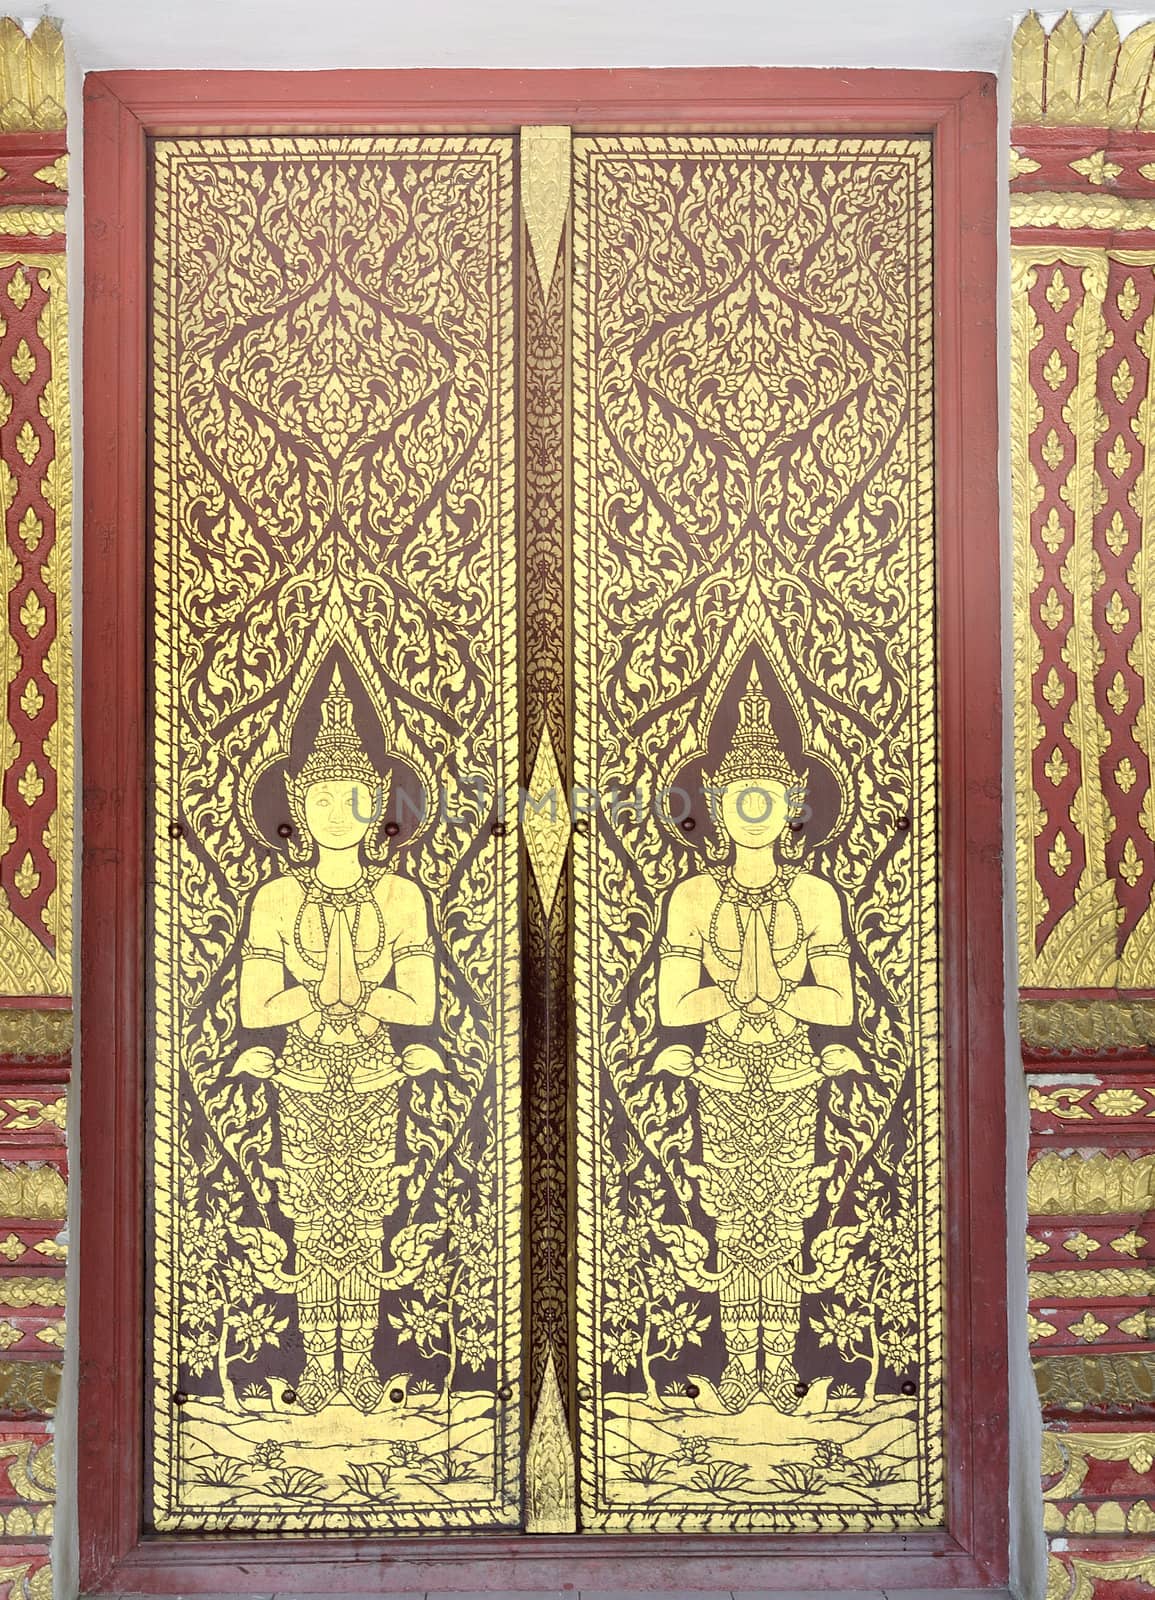 Native Thai style of pattern on door temple by sommai